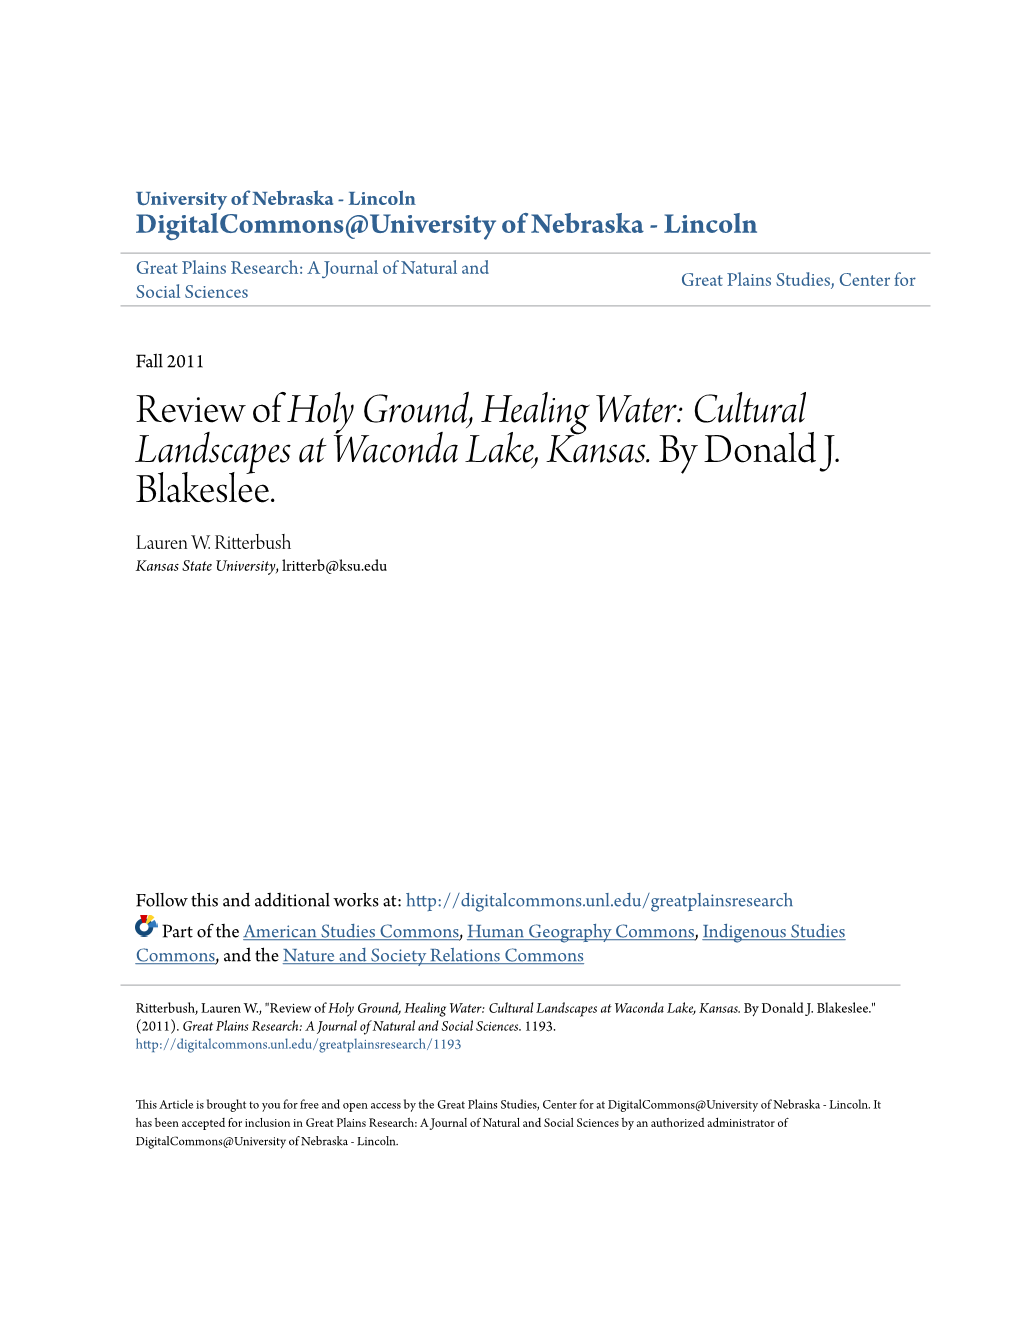 Review of Holy Ground, Healing Water: Cultural Landscapes at Waconda Lake, Kansas. by Donald J. Blakeslee. Lauren W